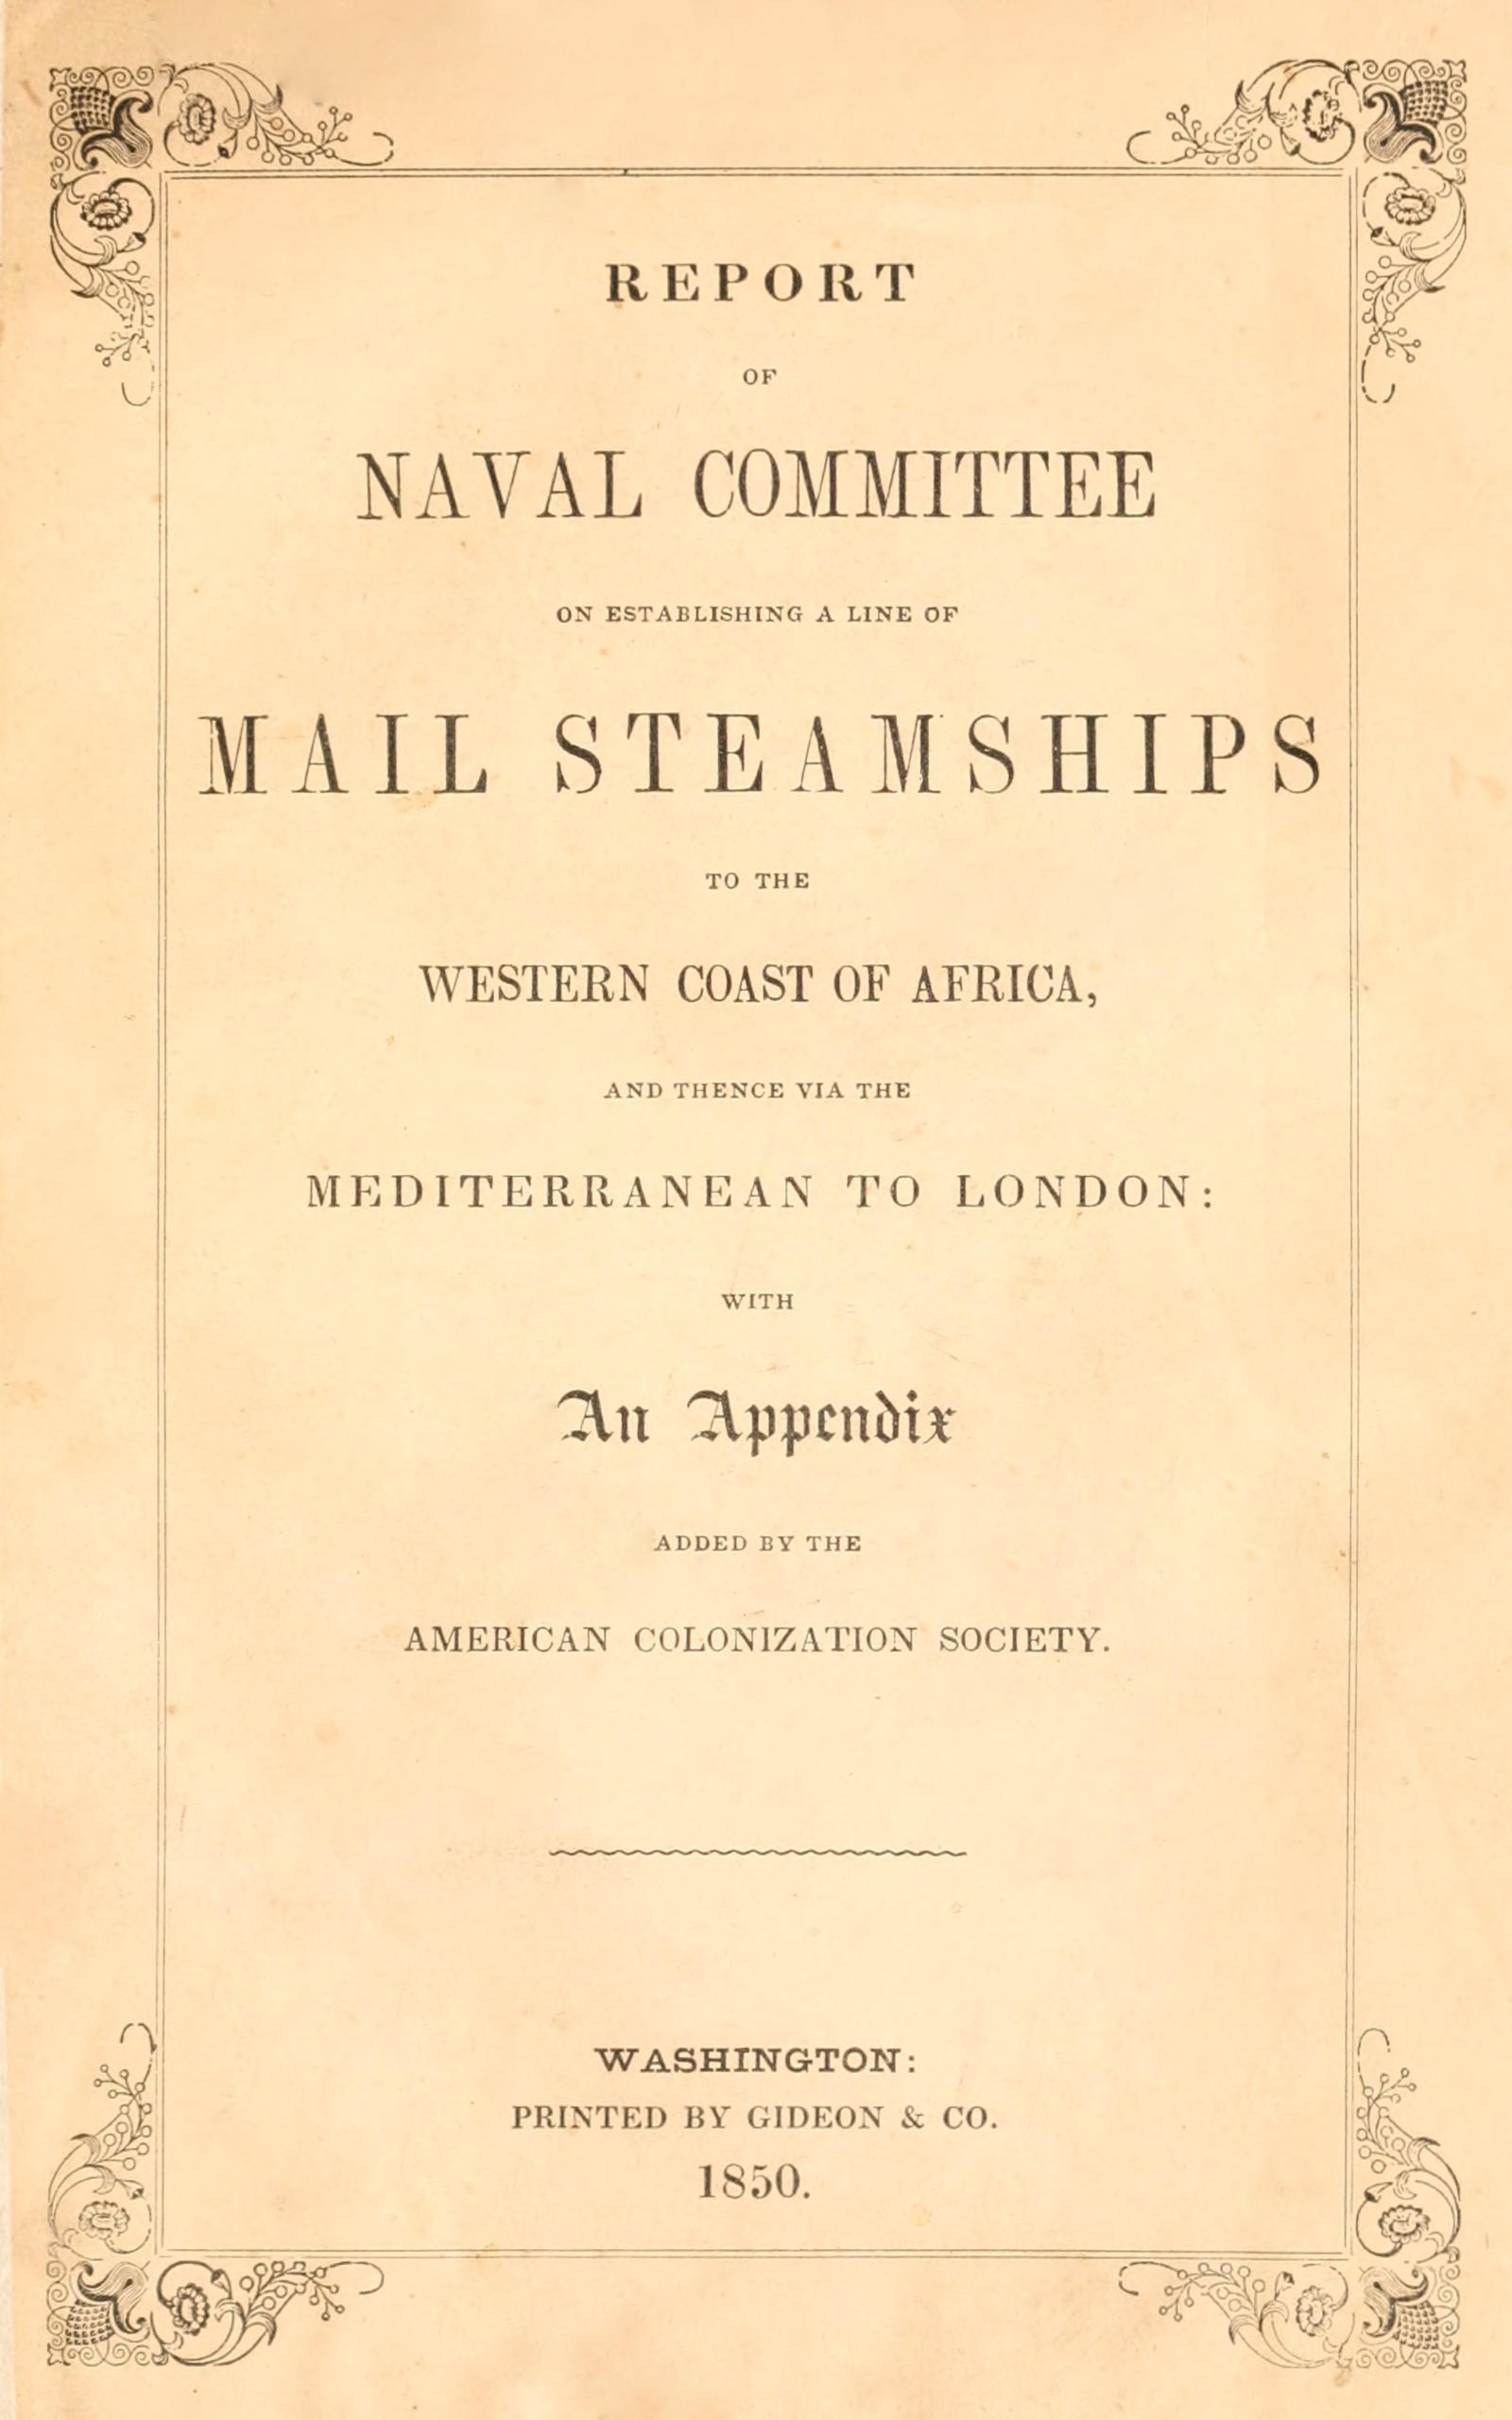 Report of the naval committee to the House of Representatives, August, 1850, in favor of the establishment of a line of mail steamships to the western coast of Africa, and thence via the Mediterranean to London; designed to promote the emigration of free persons of color from the United States to Liberia: also to increase the steam navy, and to extend the commerce of the United States.